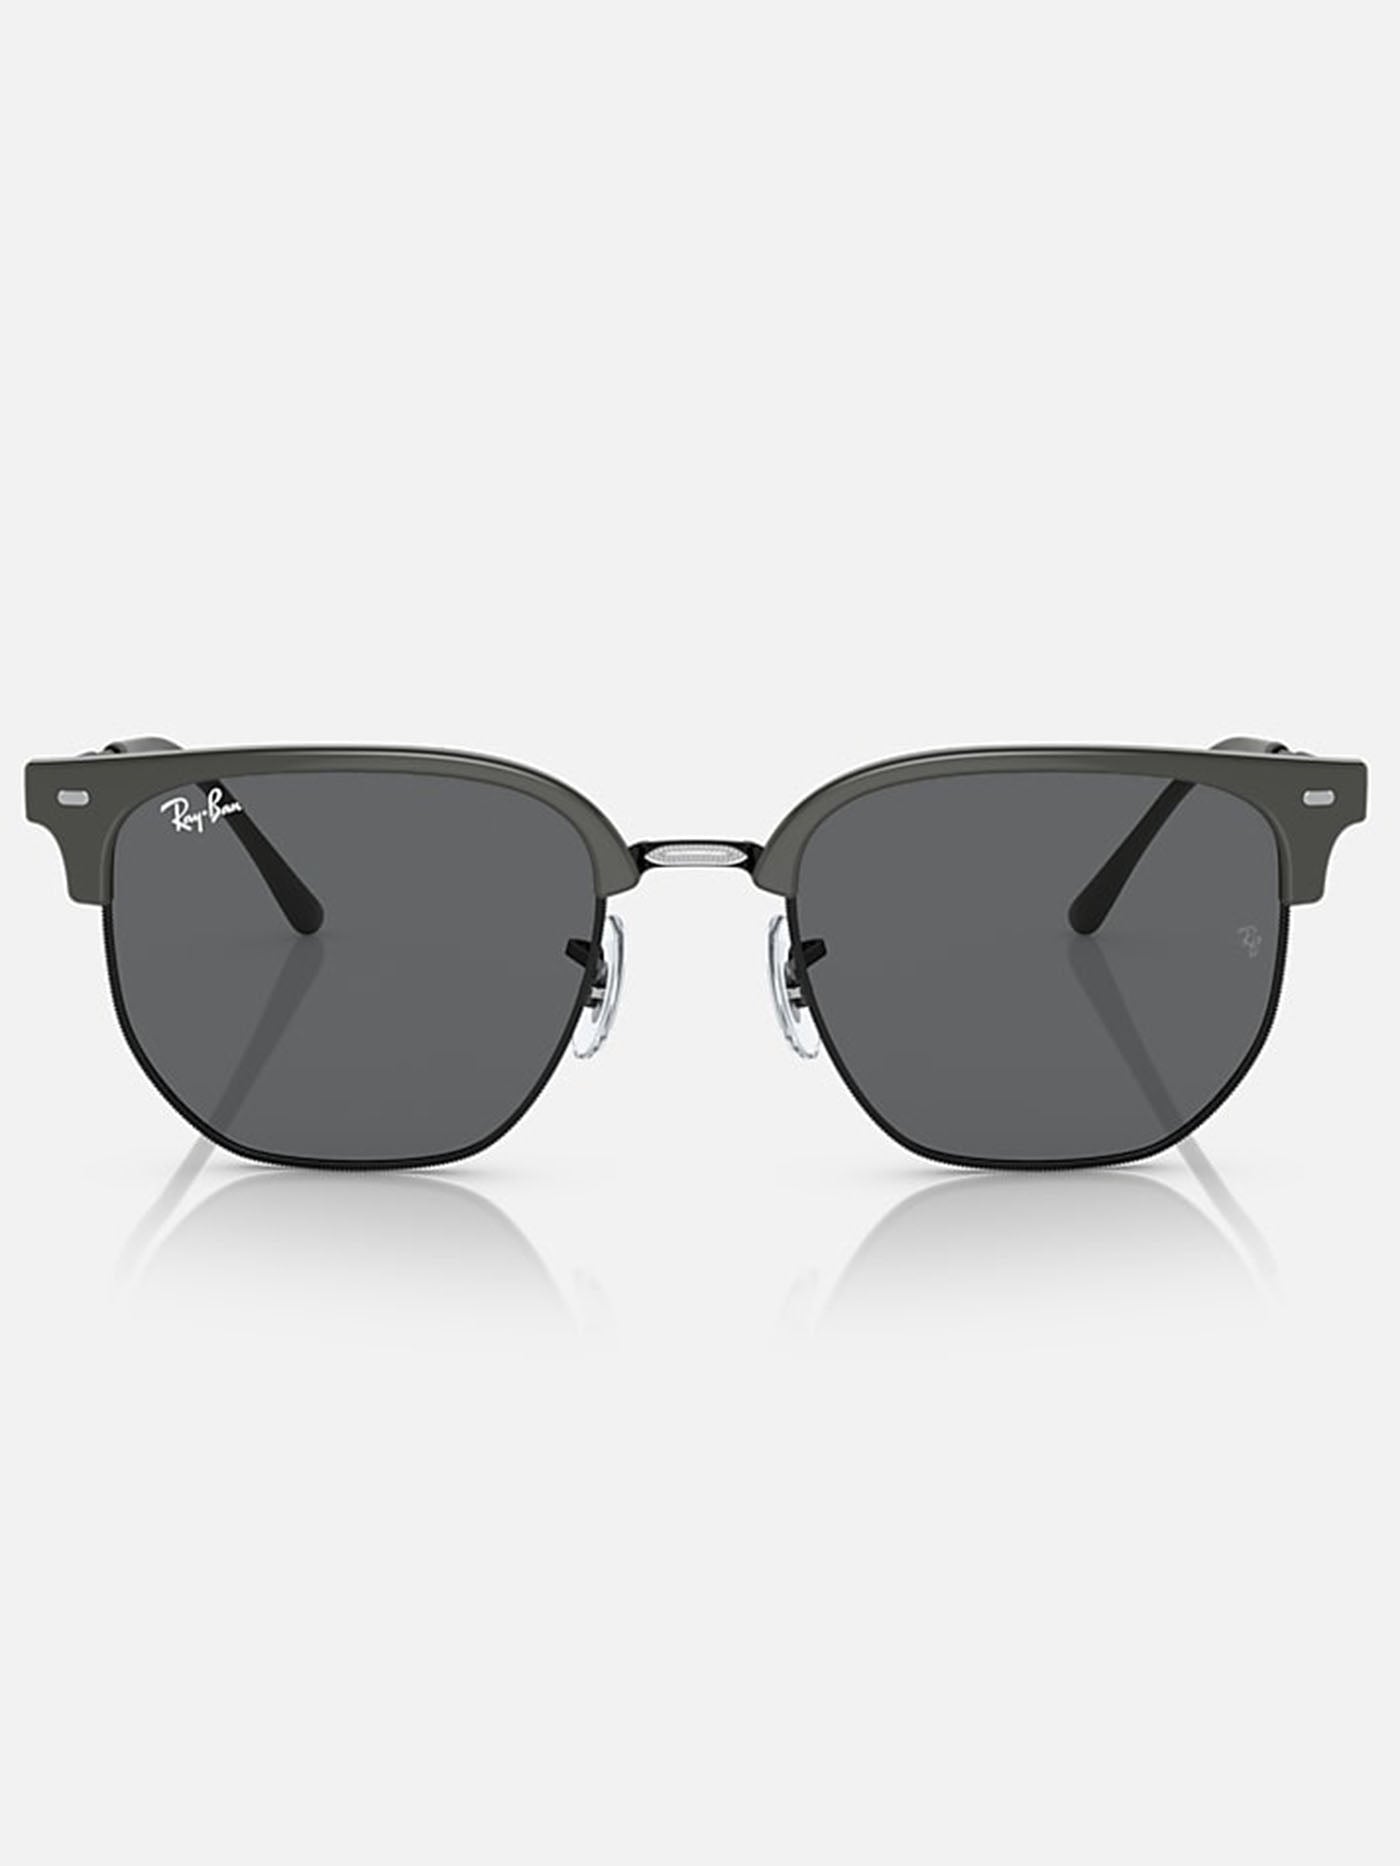 Ray Ban 2024 New Clubmaster Grey On Black/Grey Classic Sunglasses